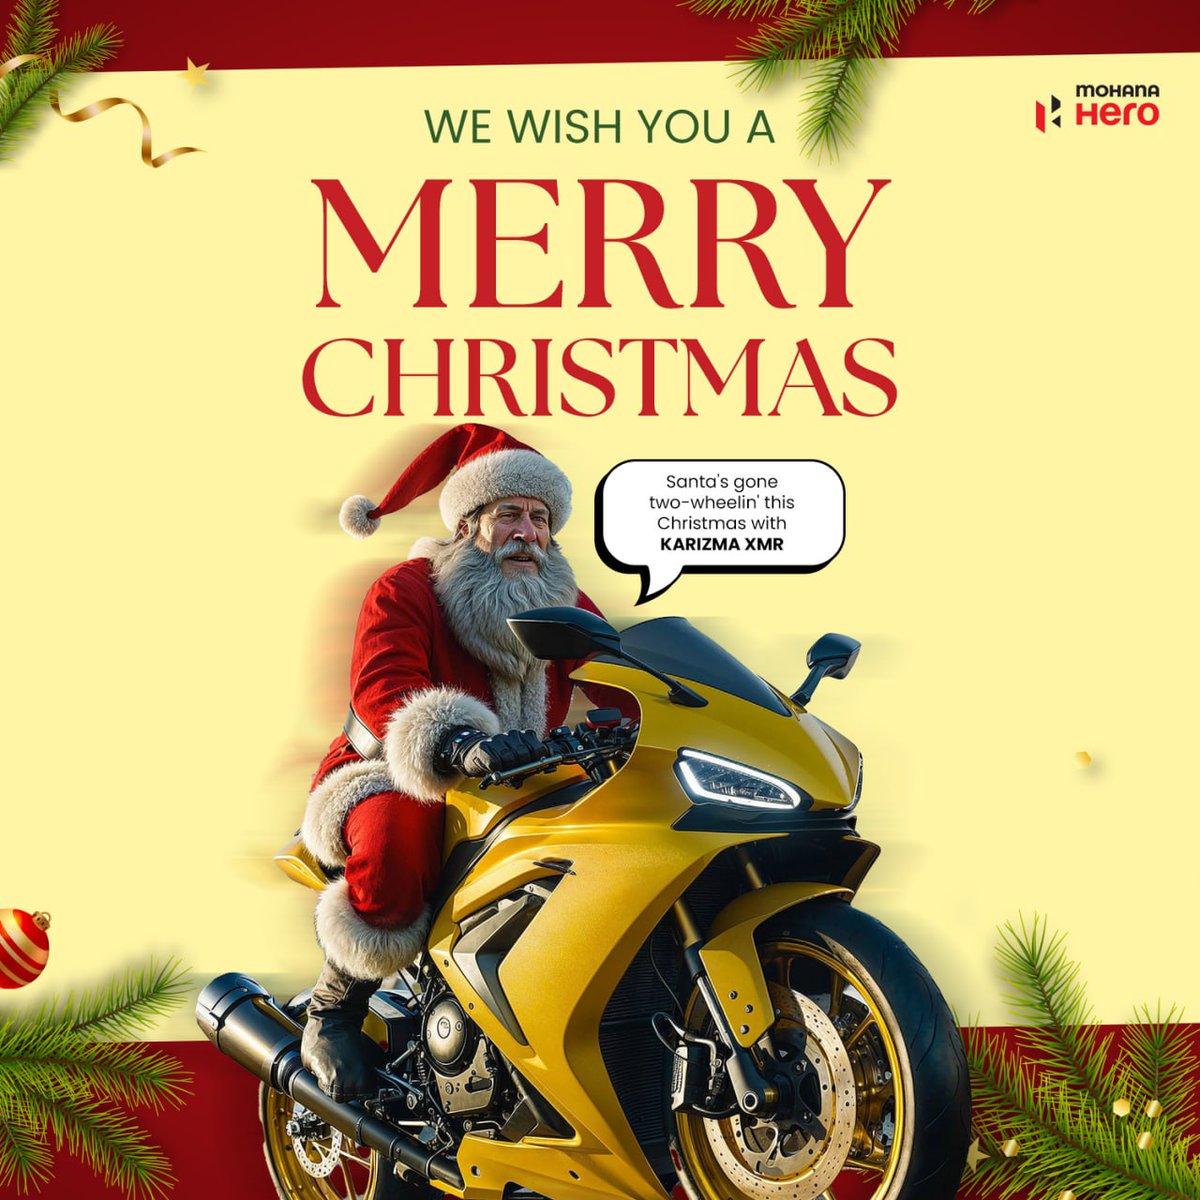 WE WISH YOU A MERRY CHRISTMAS

BOOK NOW 🏍️
VELACHERY 87787 68902

KELAMBAKKAM 99629 50004

BOOK NOW 🏍️

VELACHERY 87787 68902

KELAMBAKKAM 99629 50004

#Christmas
#MeraBirthdayMeriChristmas

#MohanaHero #EveryDragstersDream #HeroMotoCorp #Chennai #Xtreme160R4V #Xtreme160R